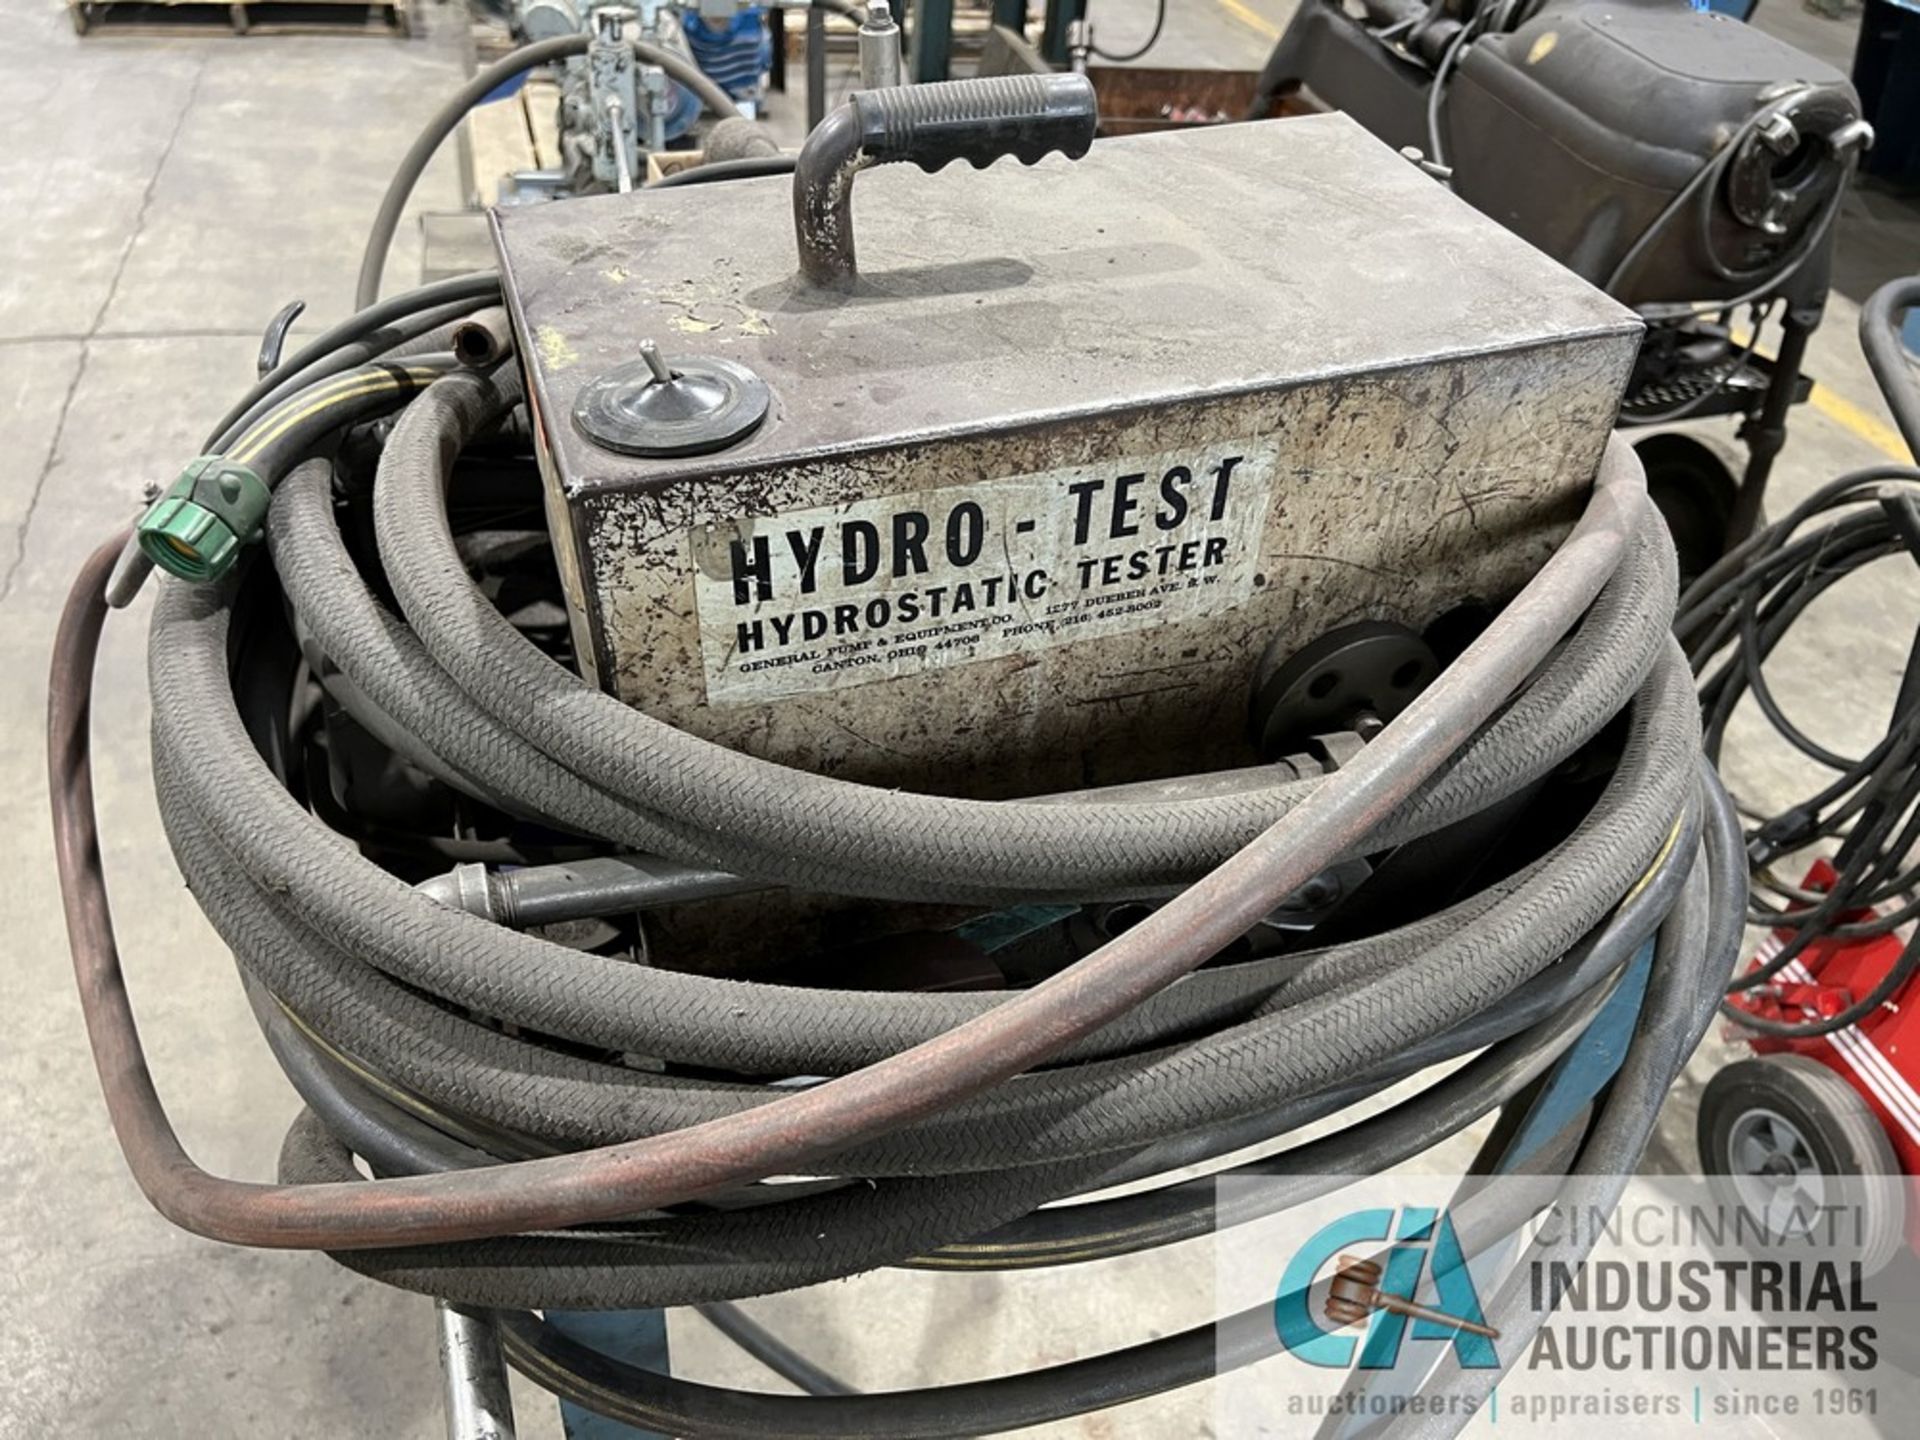 HYDRO-TEST HYDROSTATIC TESTER - Image 2 of 3